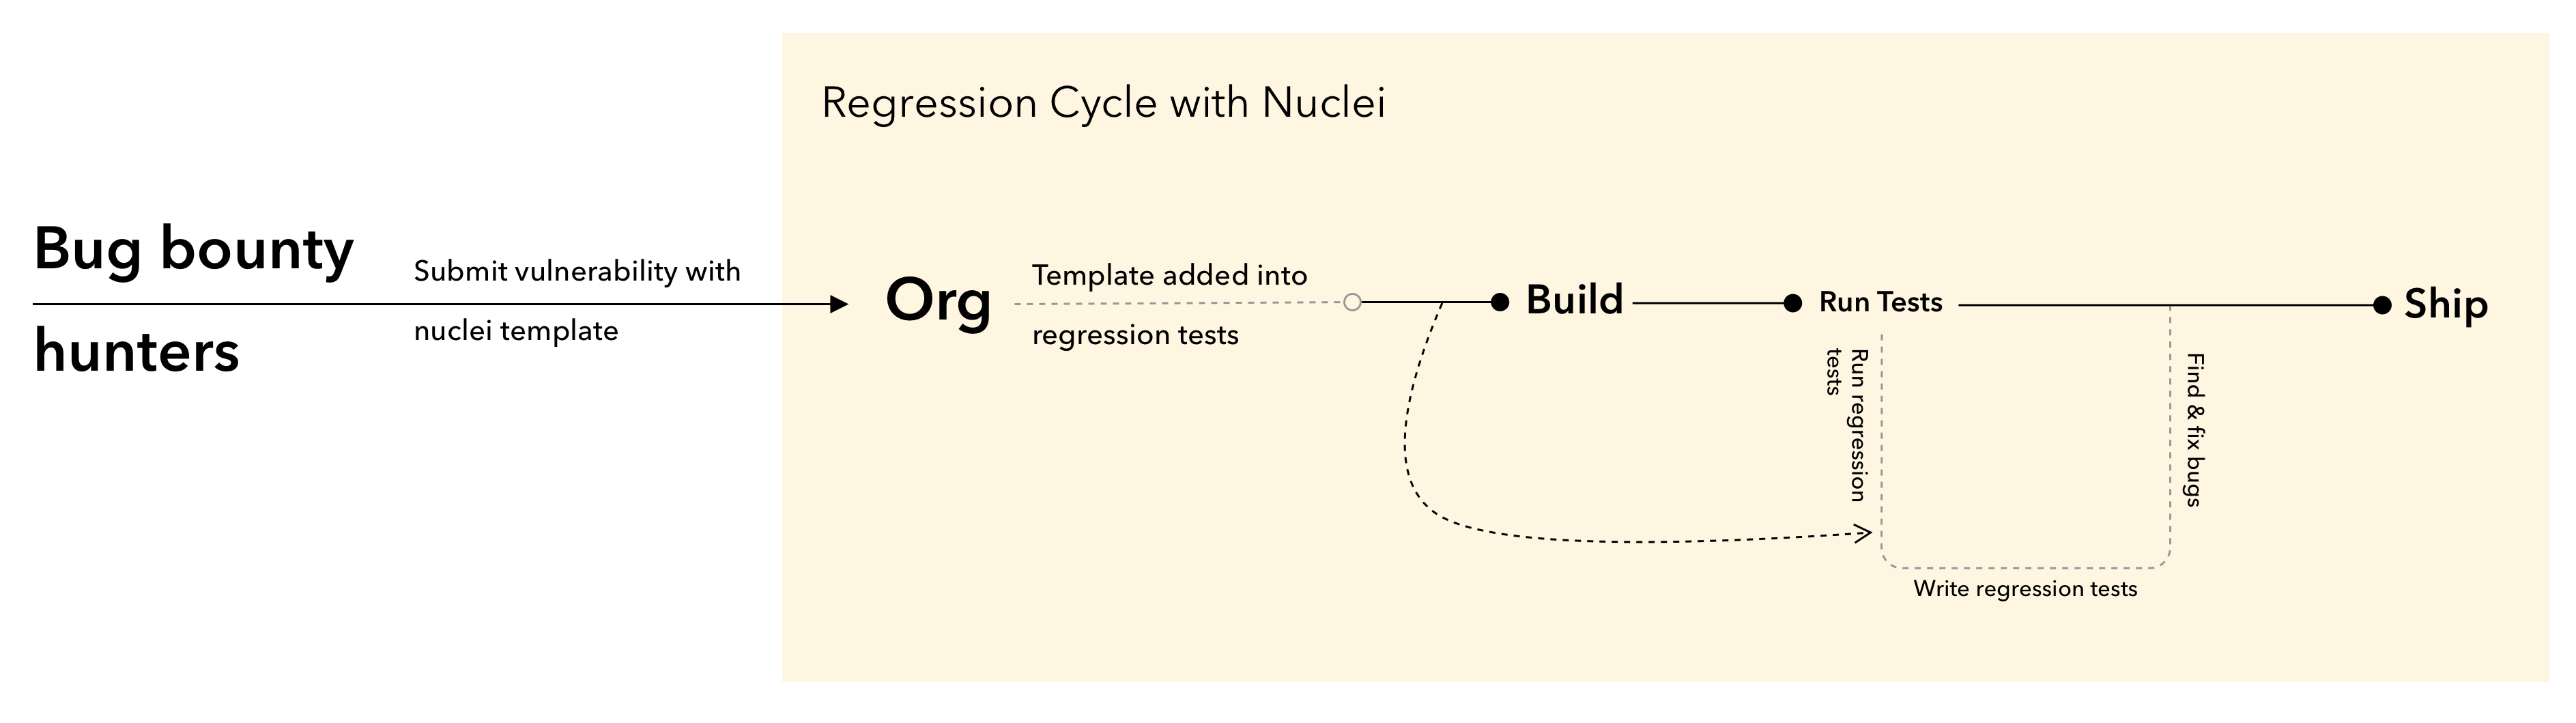 regression-with-nuclei.jpg